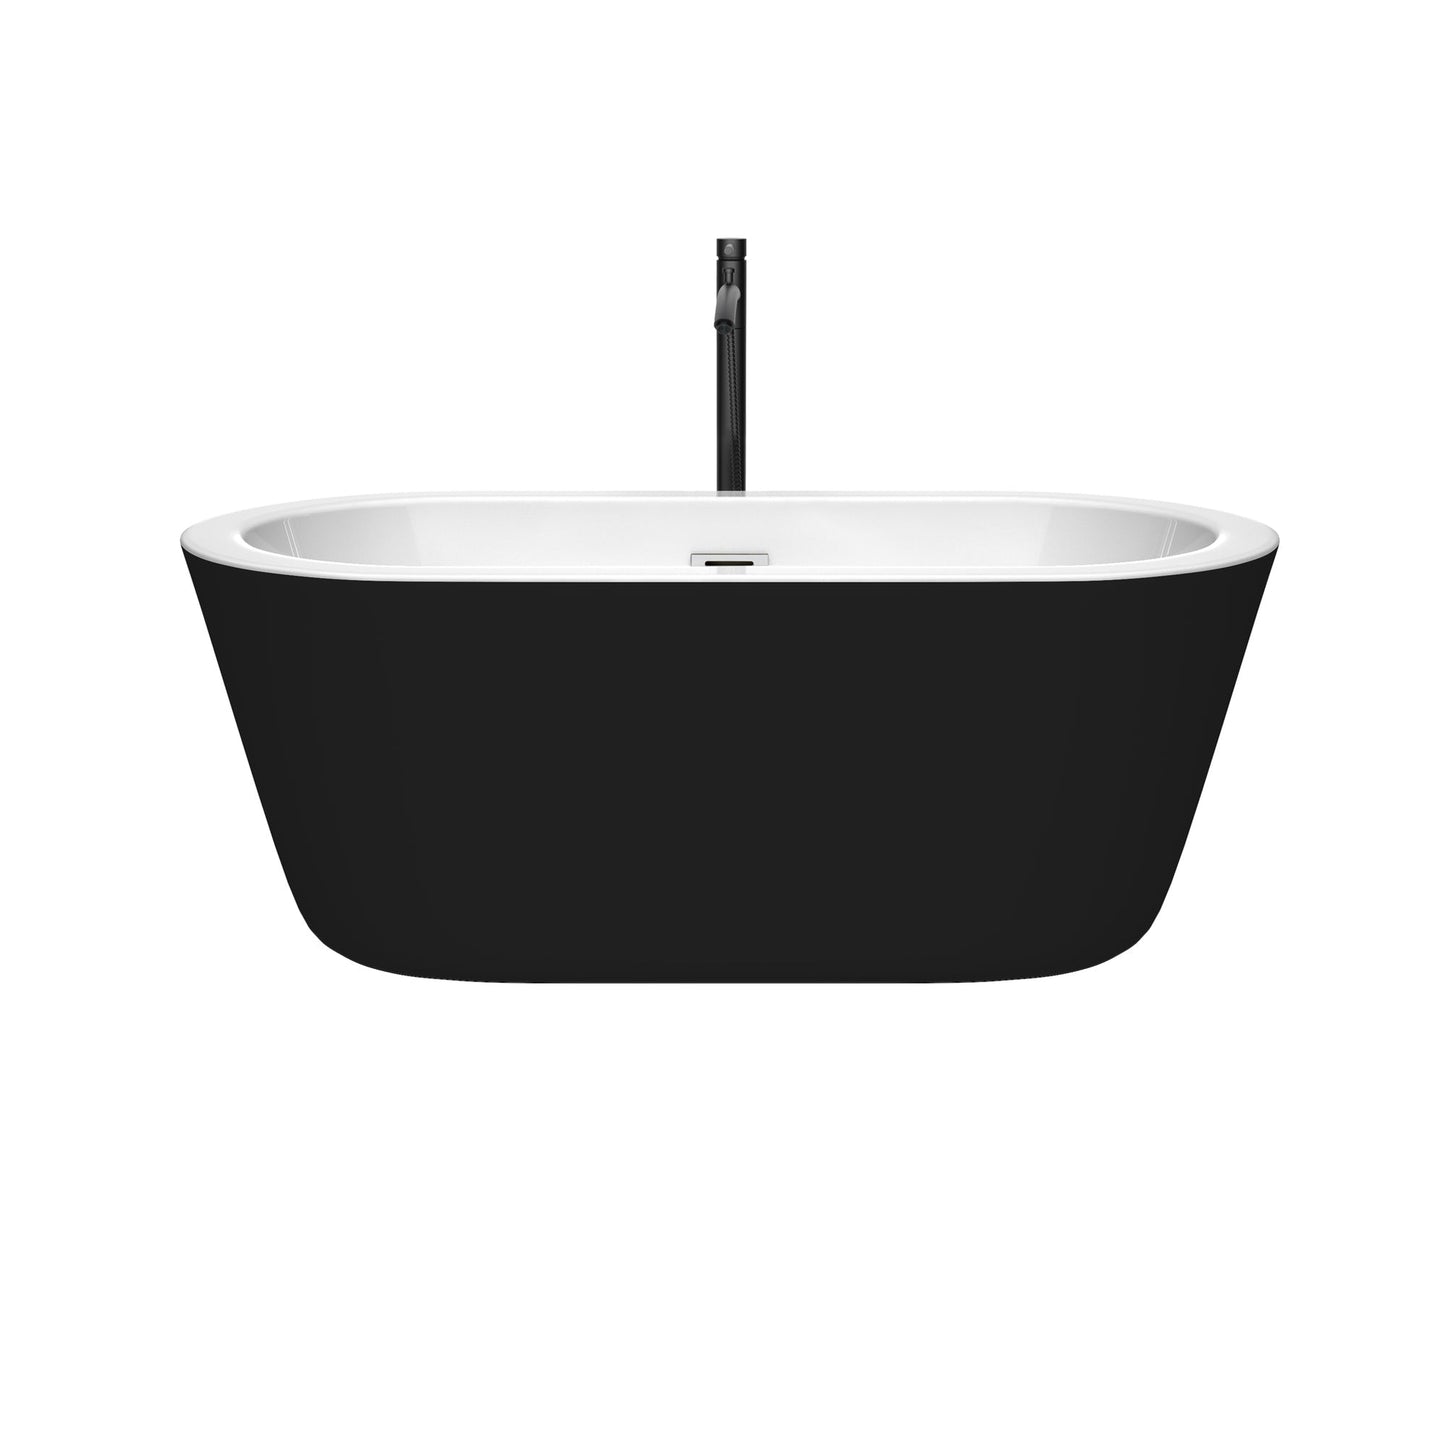 Wyndham Collection Mermaid 60" Freestanding Bathtub in Black With White Interior With Polished Chrome Trim and Floor Mounted Faucet in Matte Black